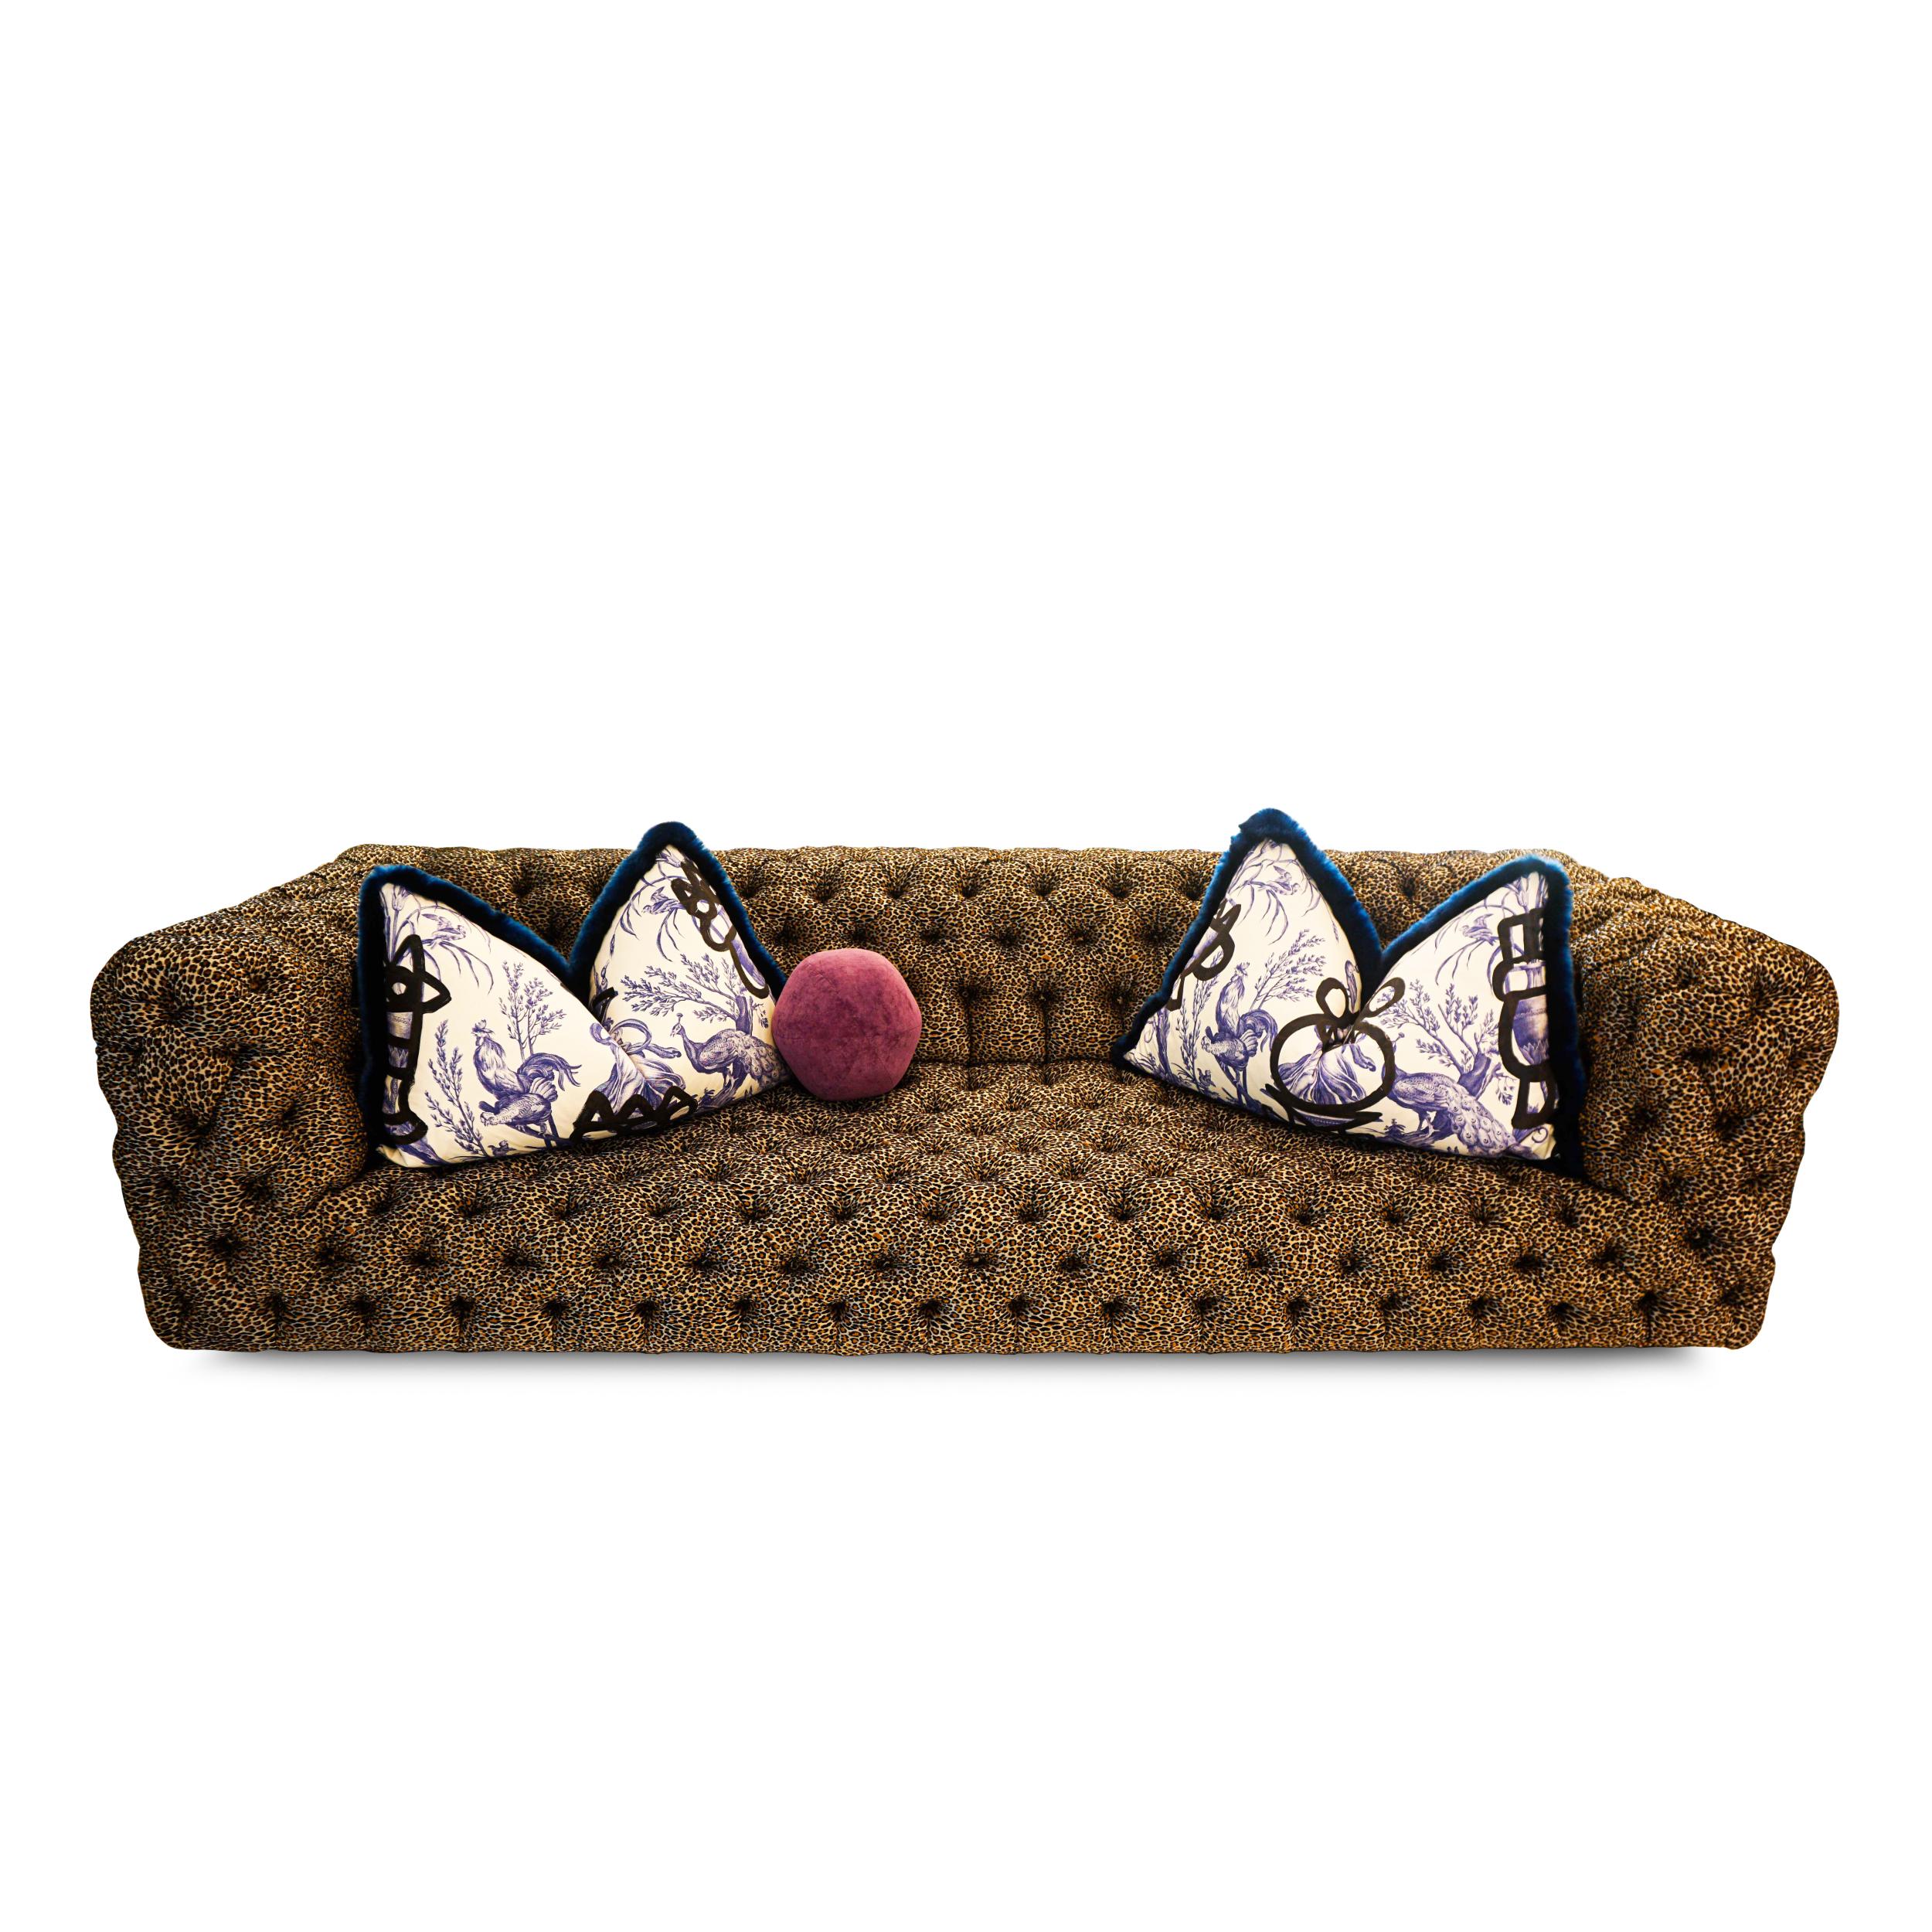 Contemporary Tufted Leopard Print Sofa For Sale